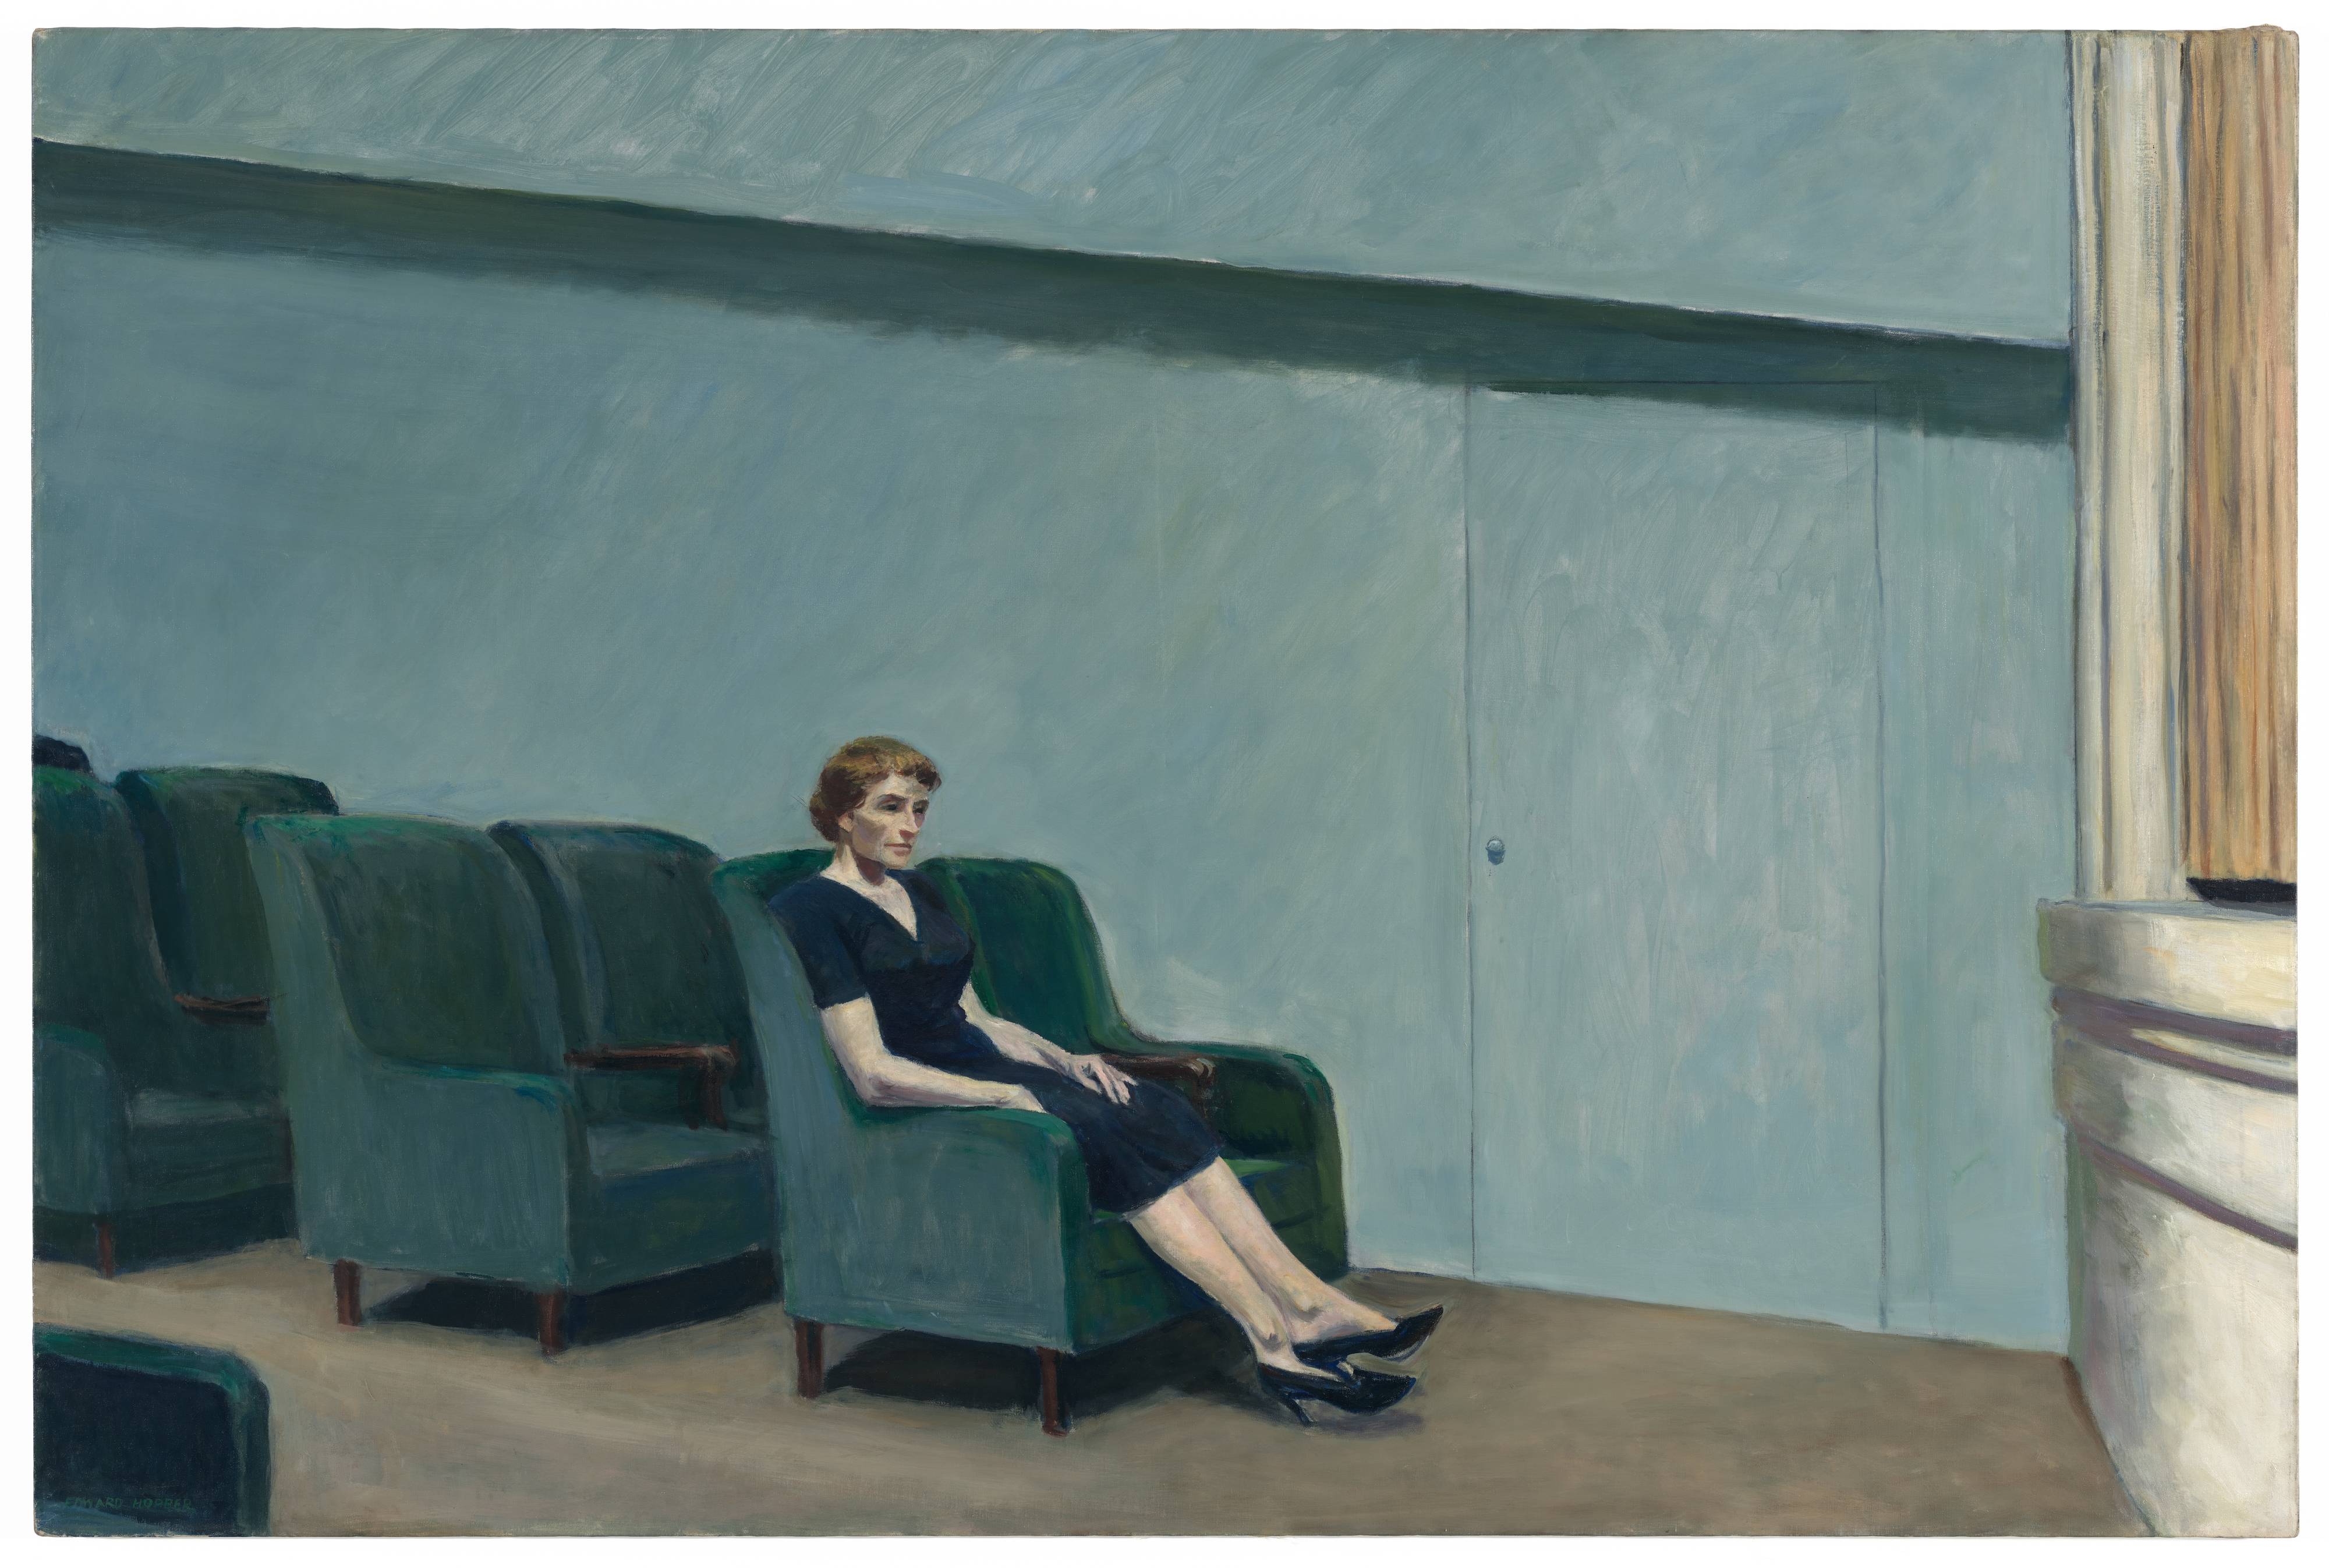 A painting of a woman in a navy blue dress and high heels sitting in the front row of an empty theater.